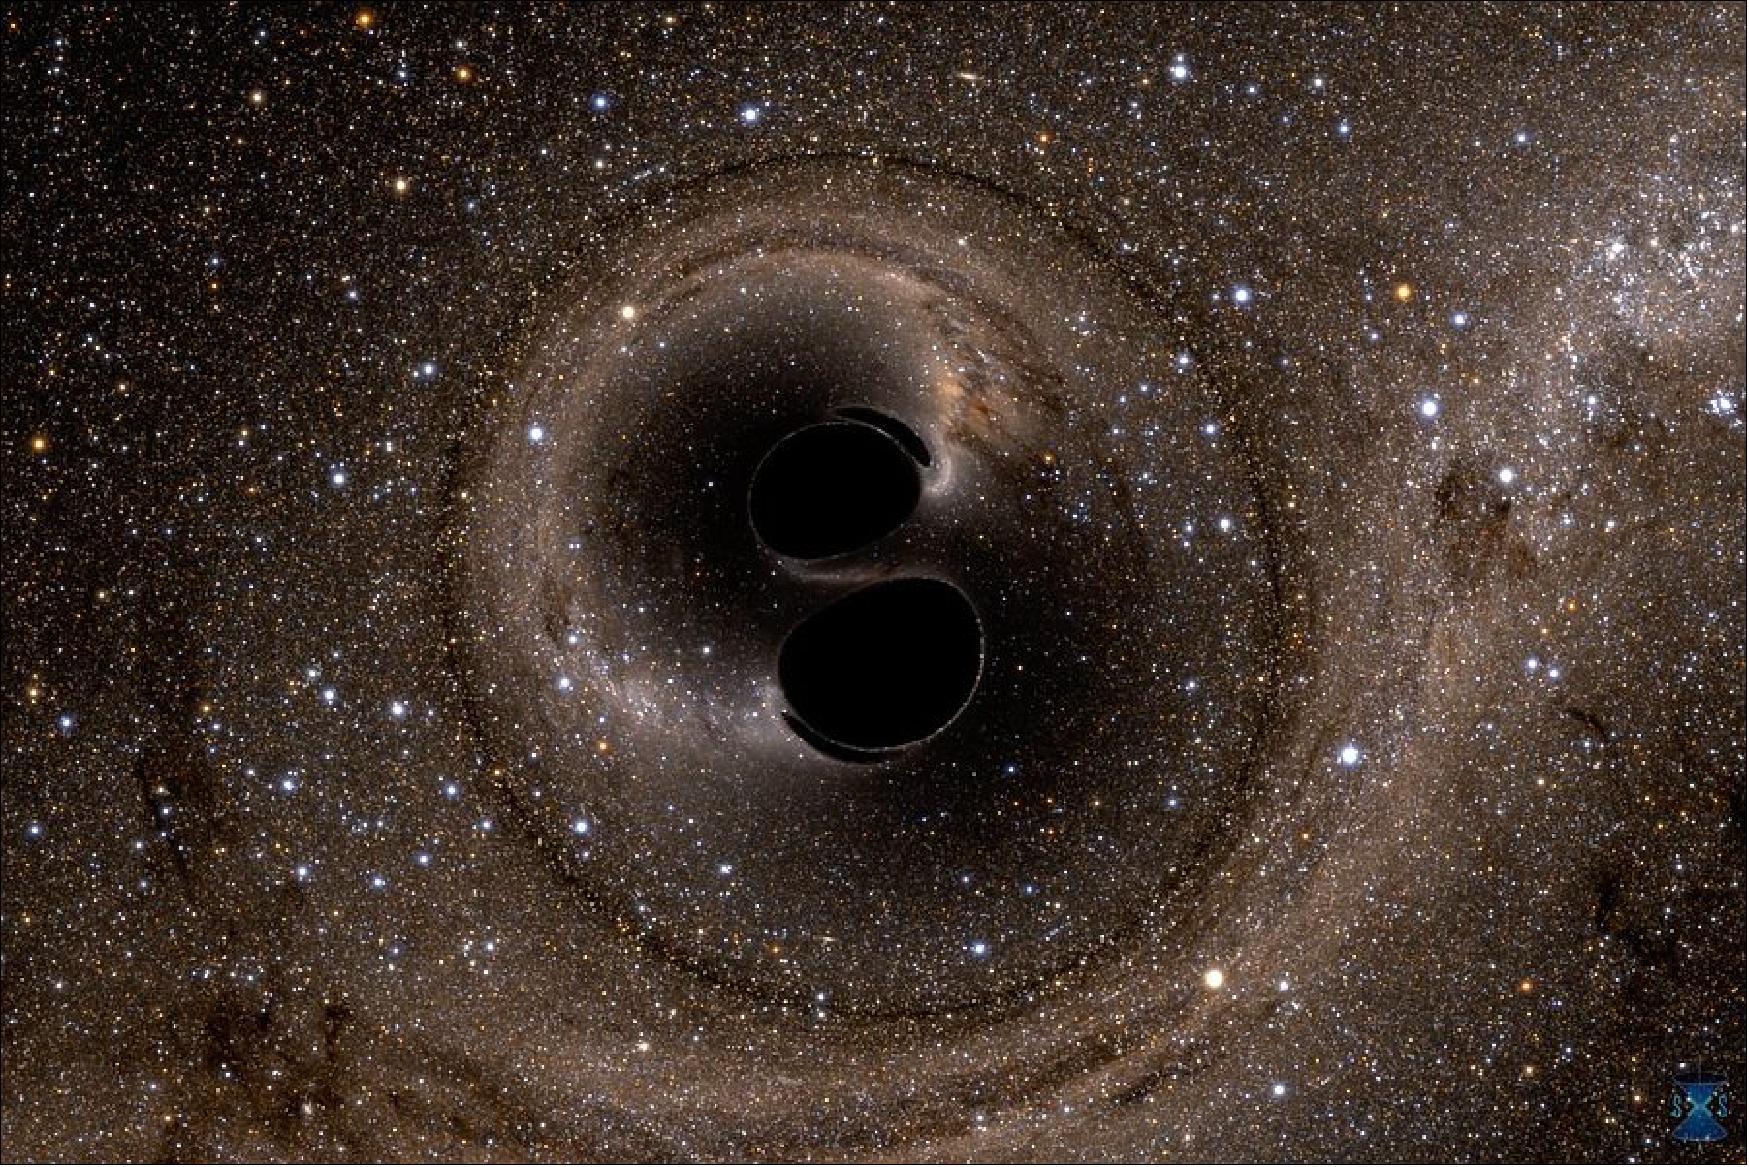 Figure 30: Physicists at MIT and elsewhere have used gravitational waves to observationally confirm Hawking's black hole area theorem for the first time. This computer simulation shows the collision of two black holes that produced the gravitational wave signal, GW150914 (image credits: Simulating eXtreme Spacetimes (SXS) project. Courtesy of LIGO)